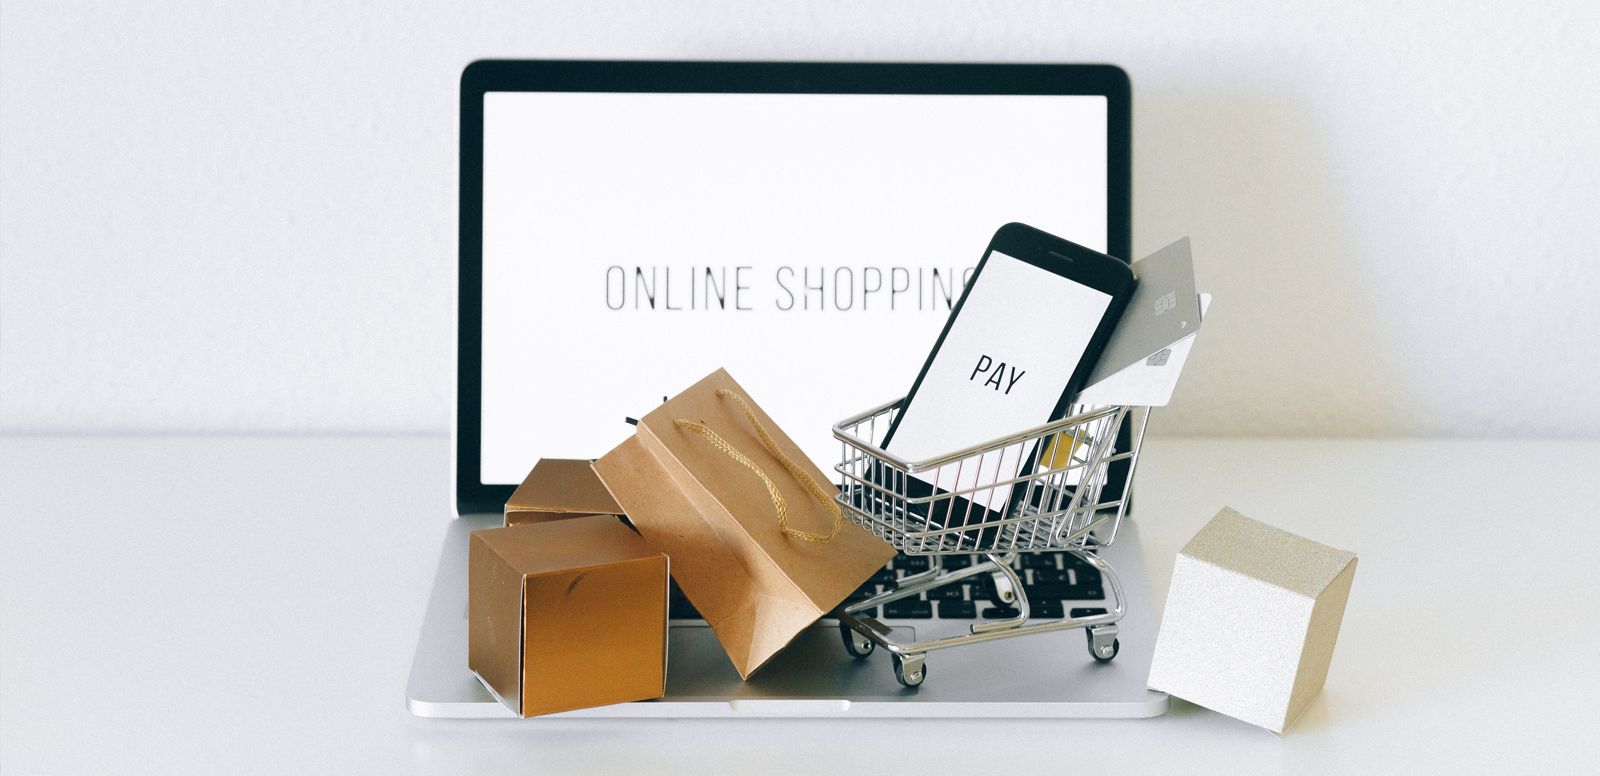 How to Find Dropshipping Products | Oneclick Online Service